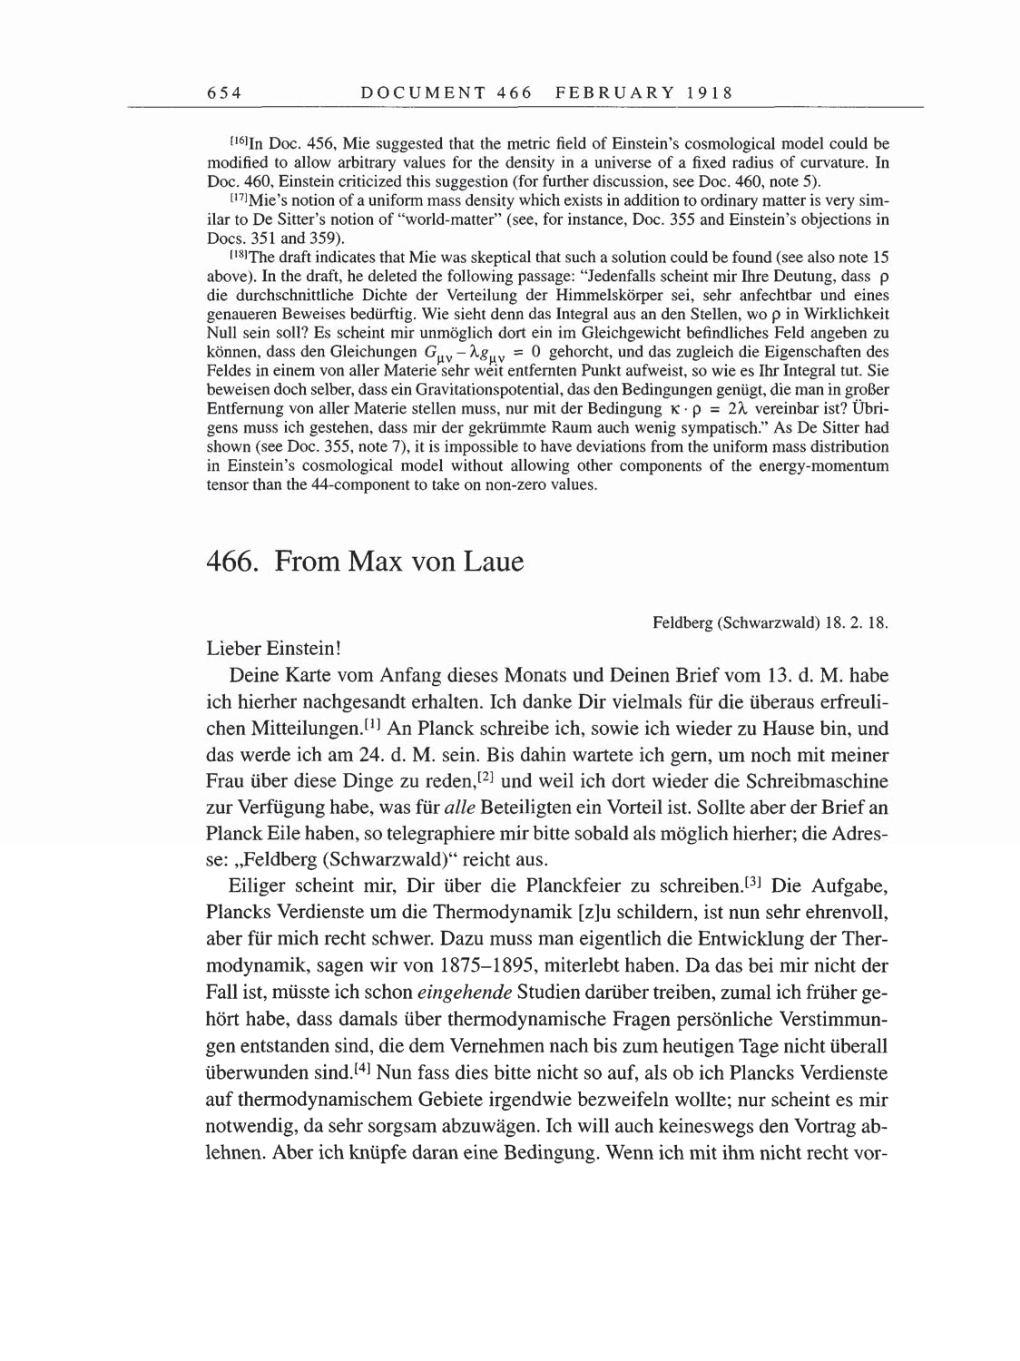 Volume 8, Part B: The Berlin Years: Correspondence 1918 page 654